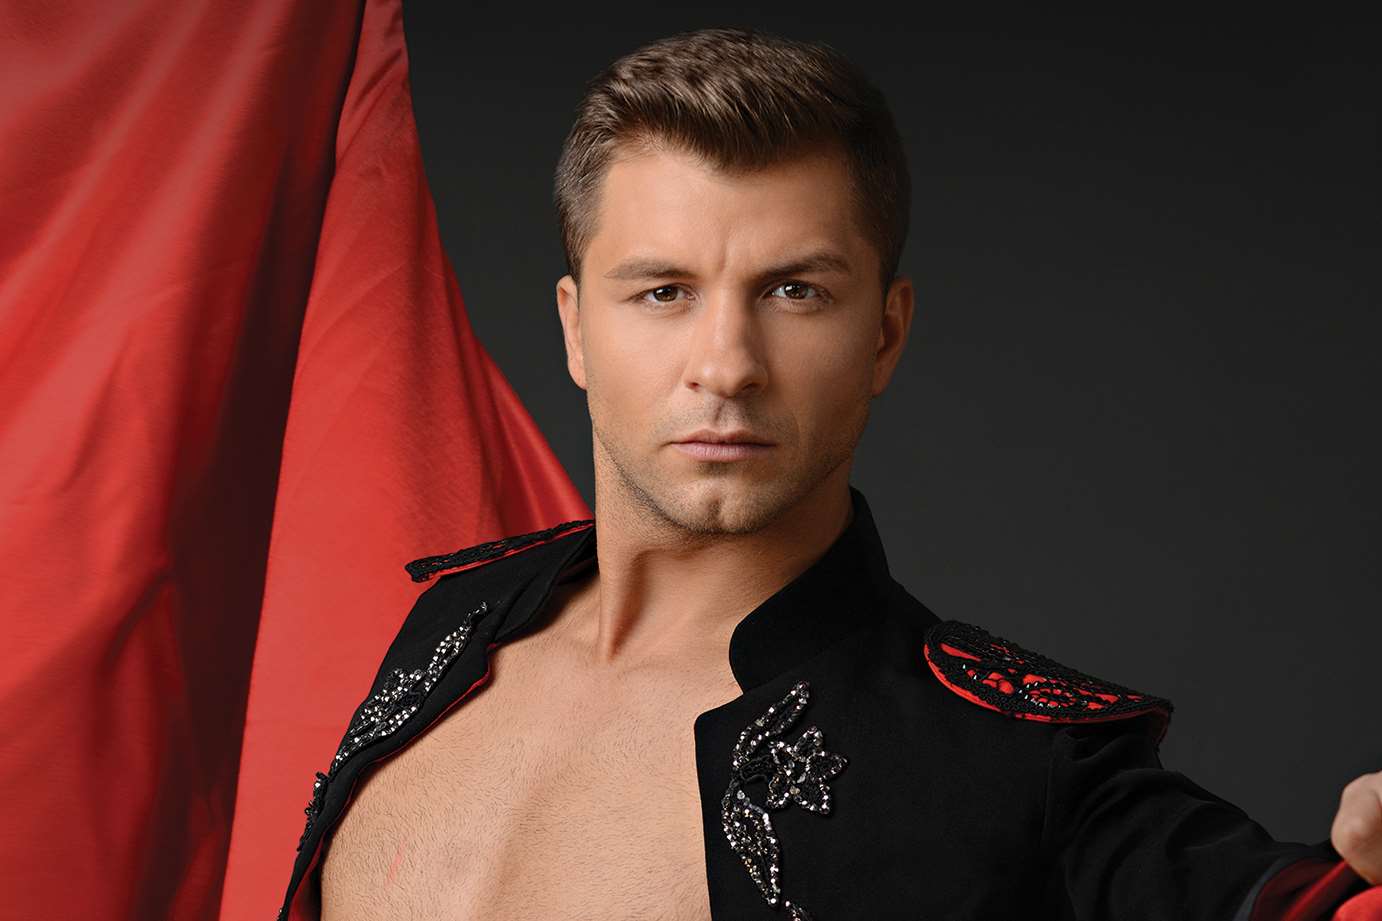 Pasha Kovalev started dancing at the age of eight